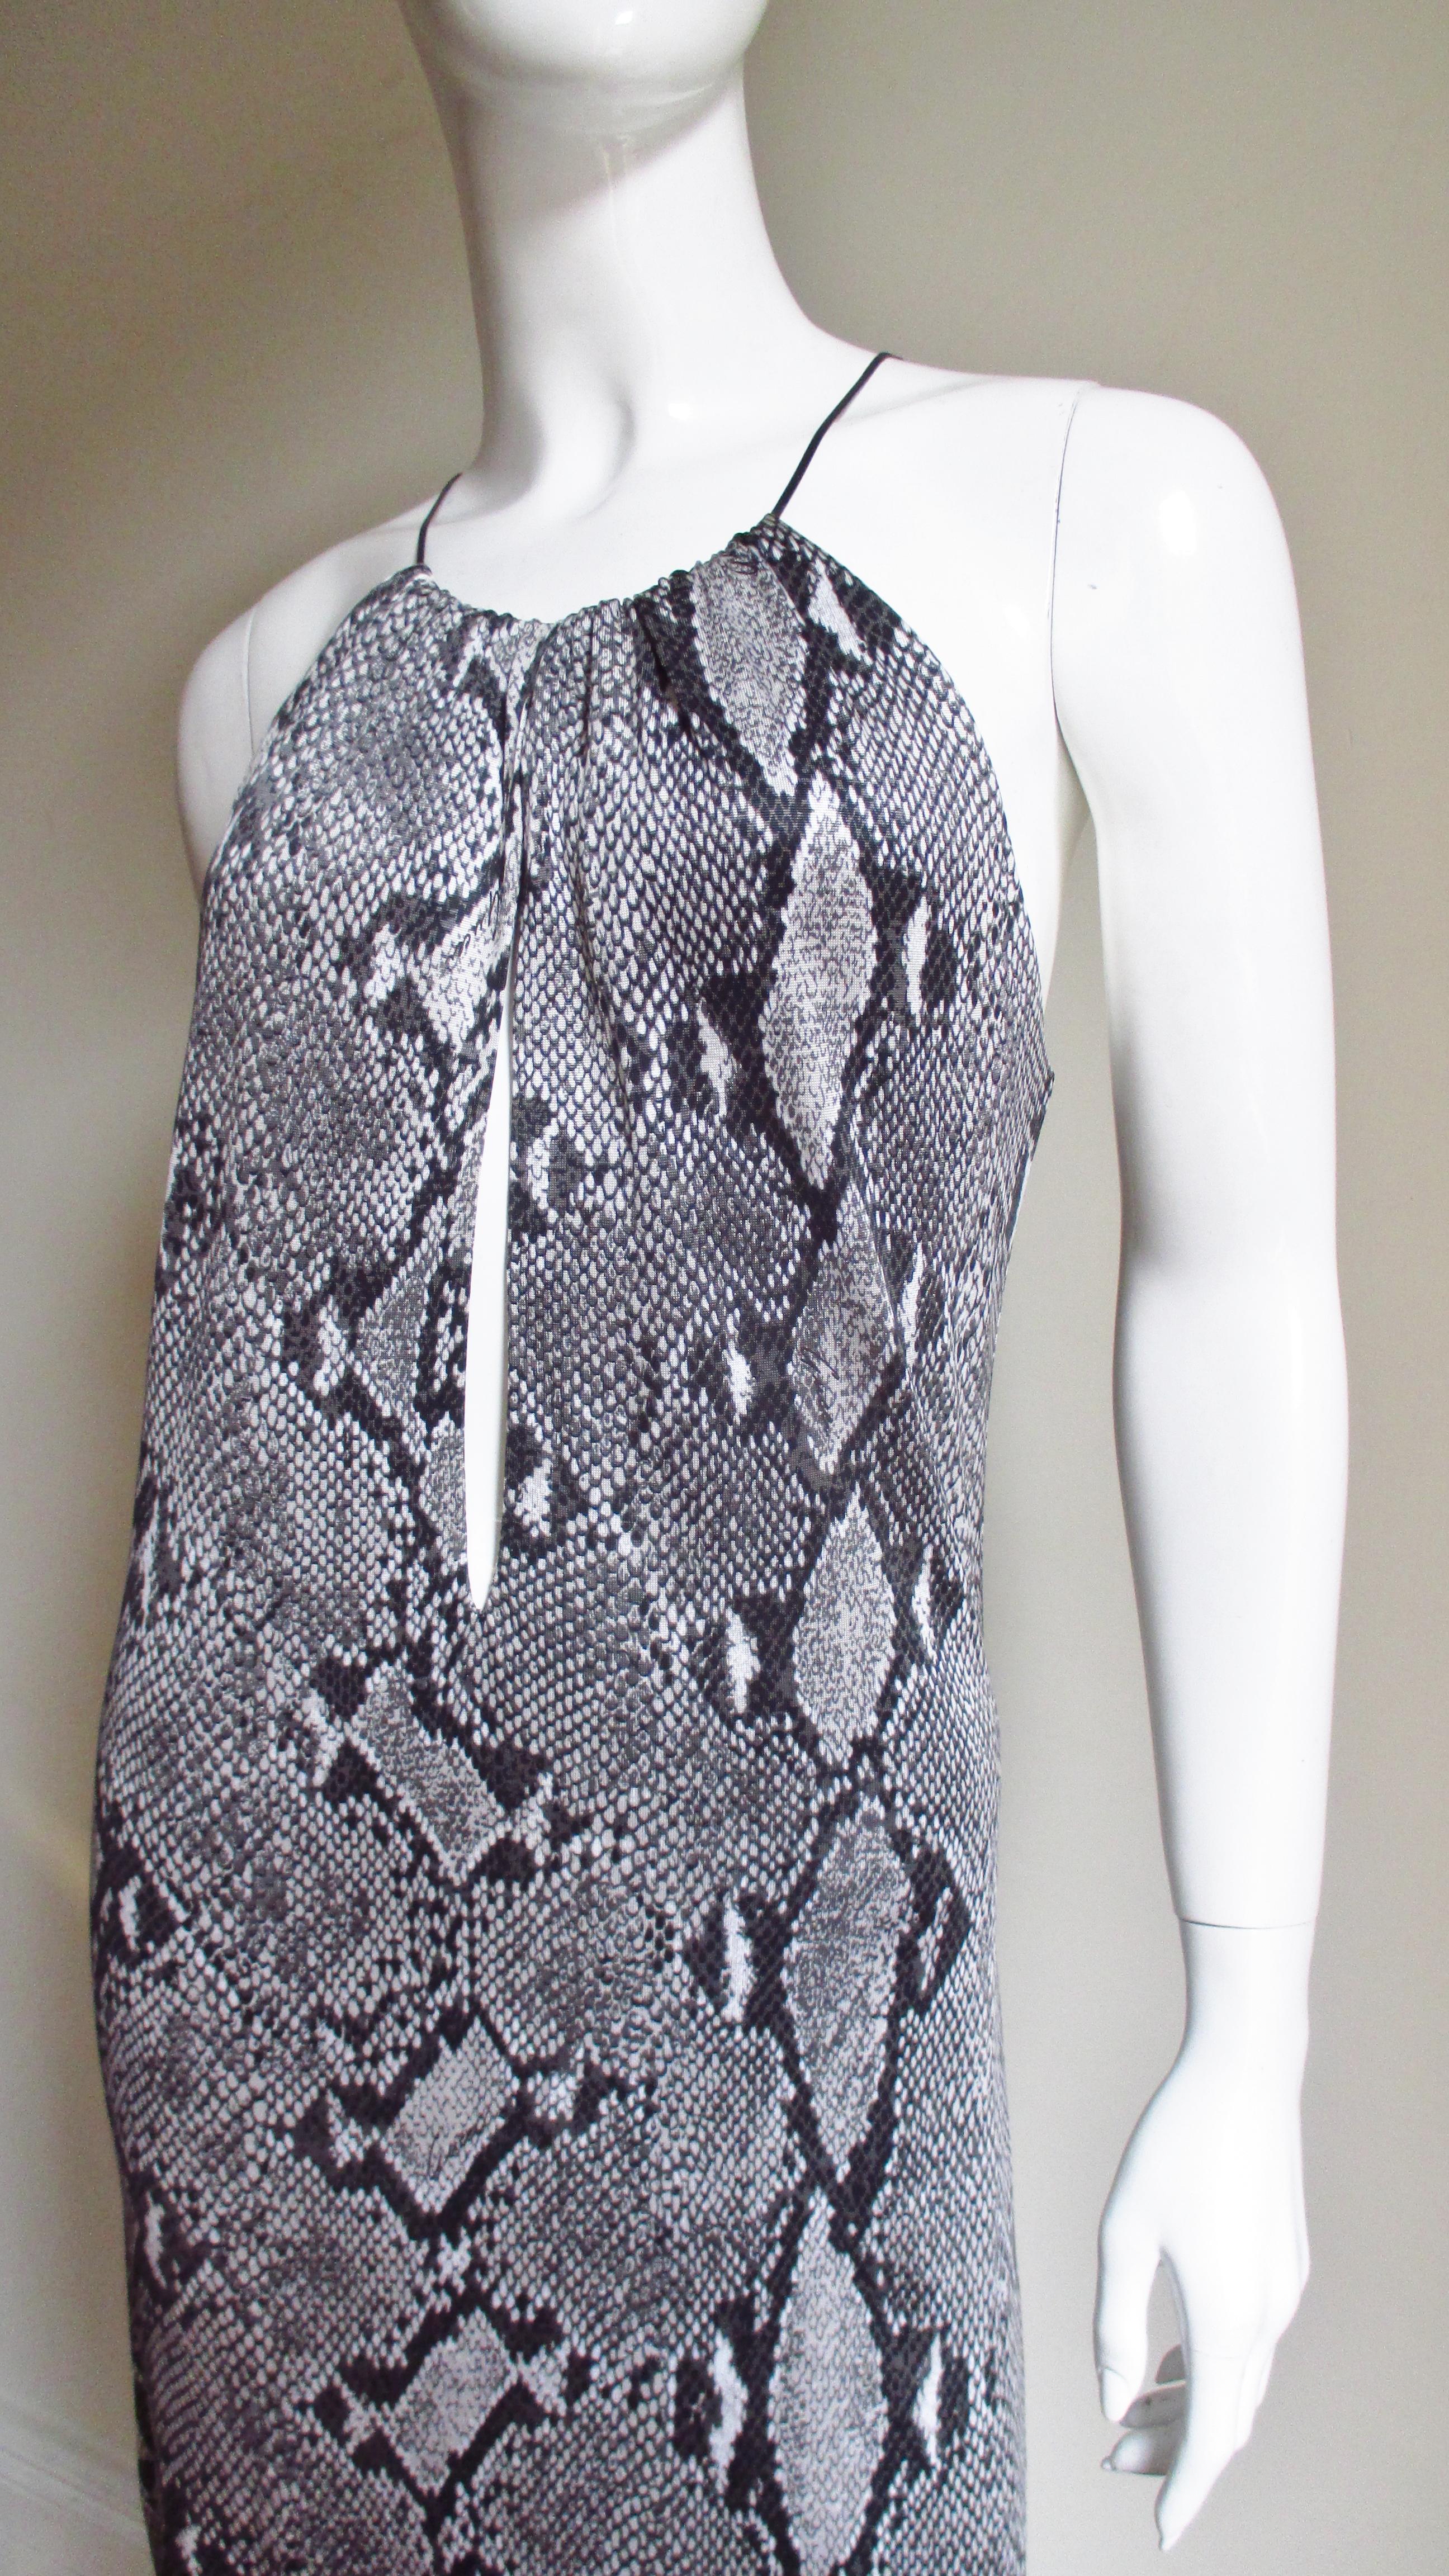 Women's Tom Ford for Gucci Python Print Jersey Dress